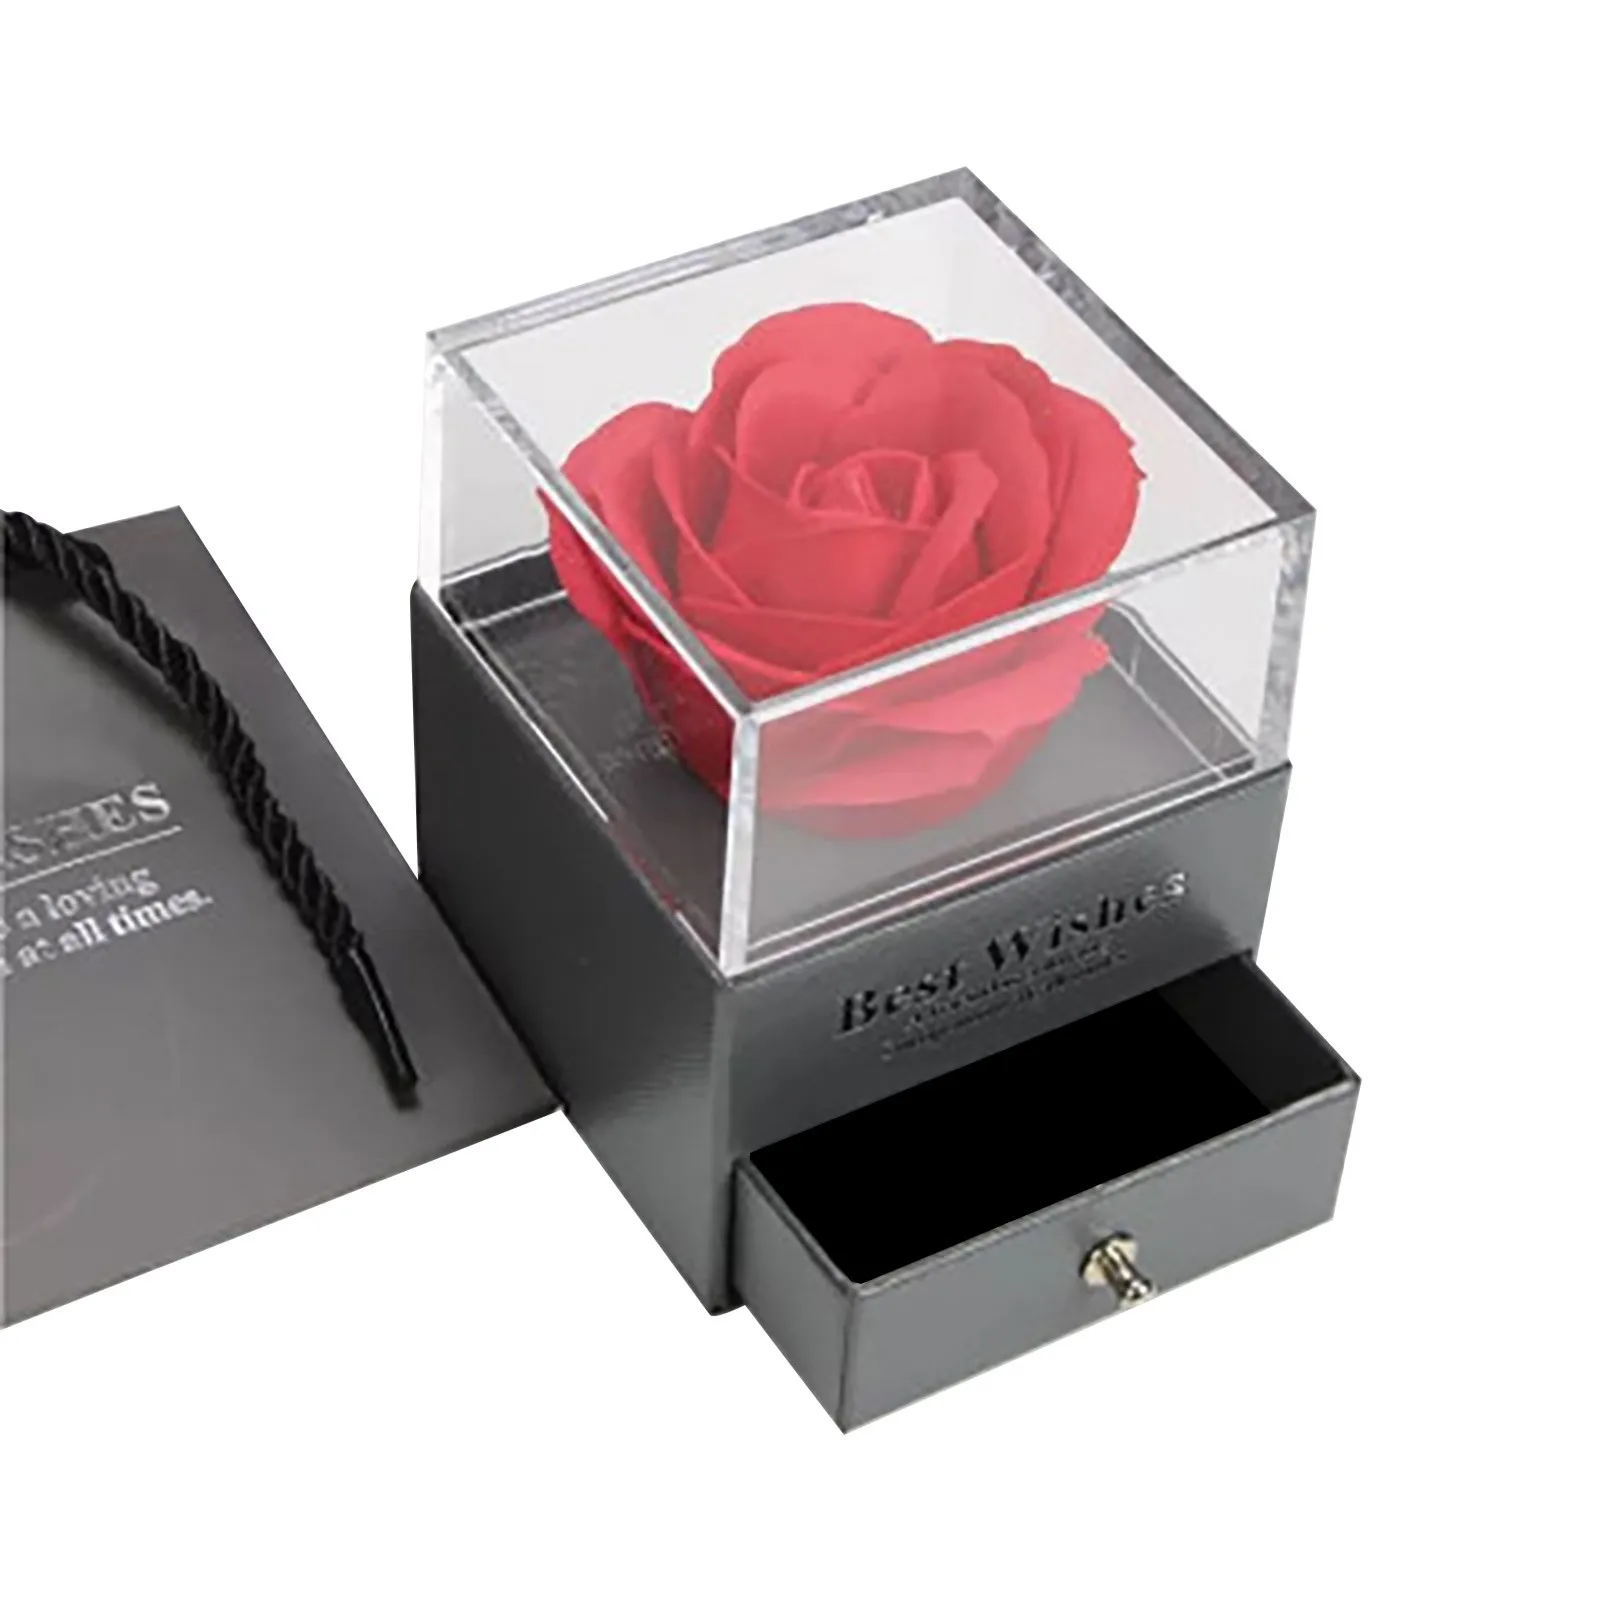 S3fc70a0596964509bb71ea7348a651299 Everlasting Flower Gift Box Rose Preservation Box Mother's Day Handmade Rose Gif